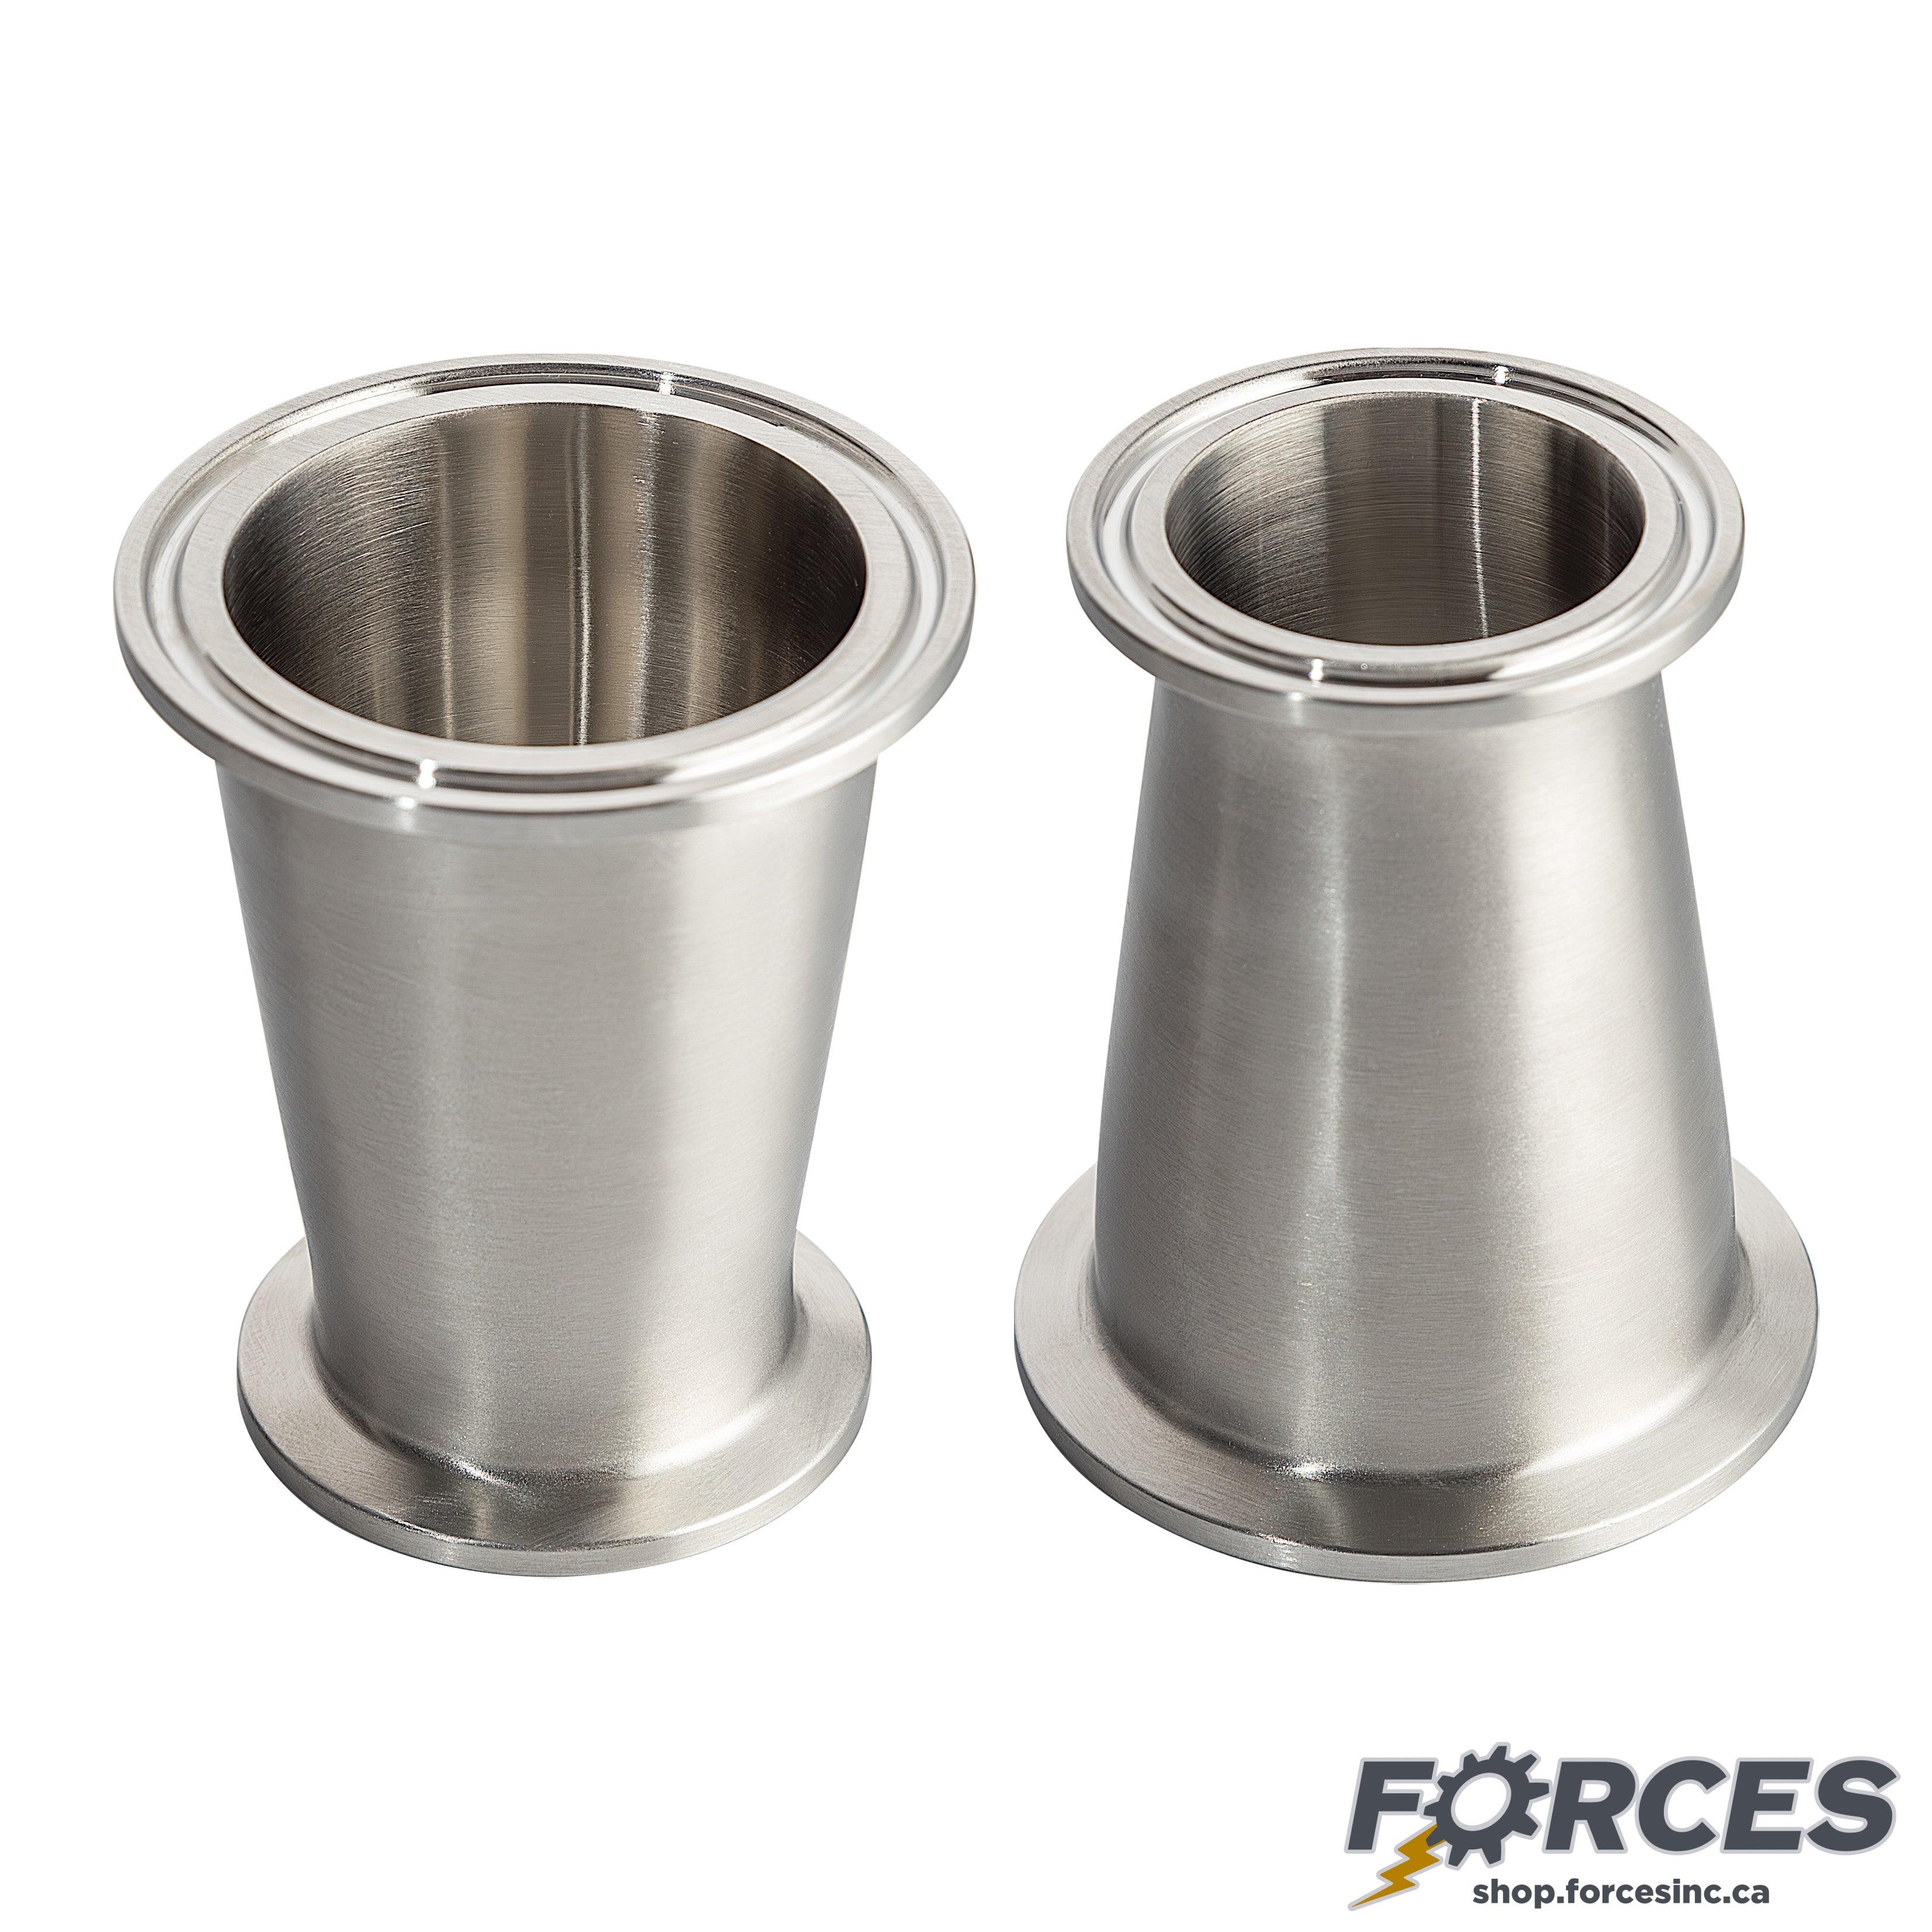 2" x 1" Tri-Clamp Concentric Reducer - Stainless Steel 304 - Forces Inc